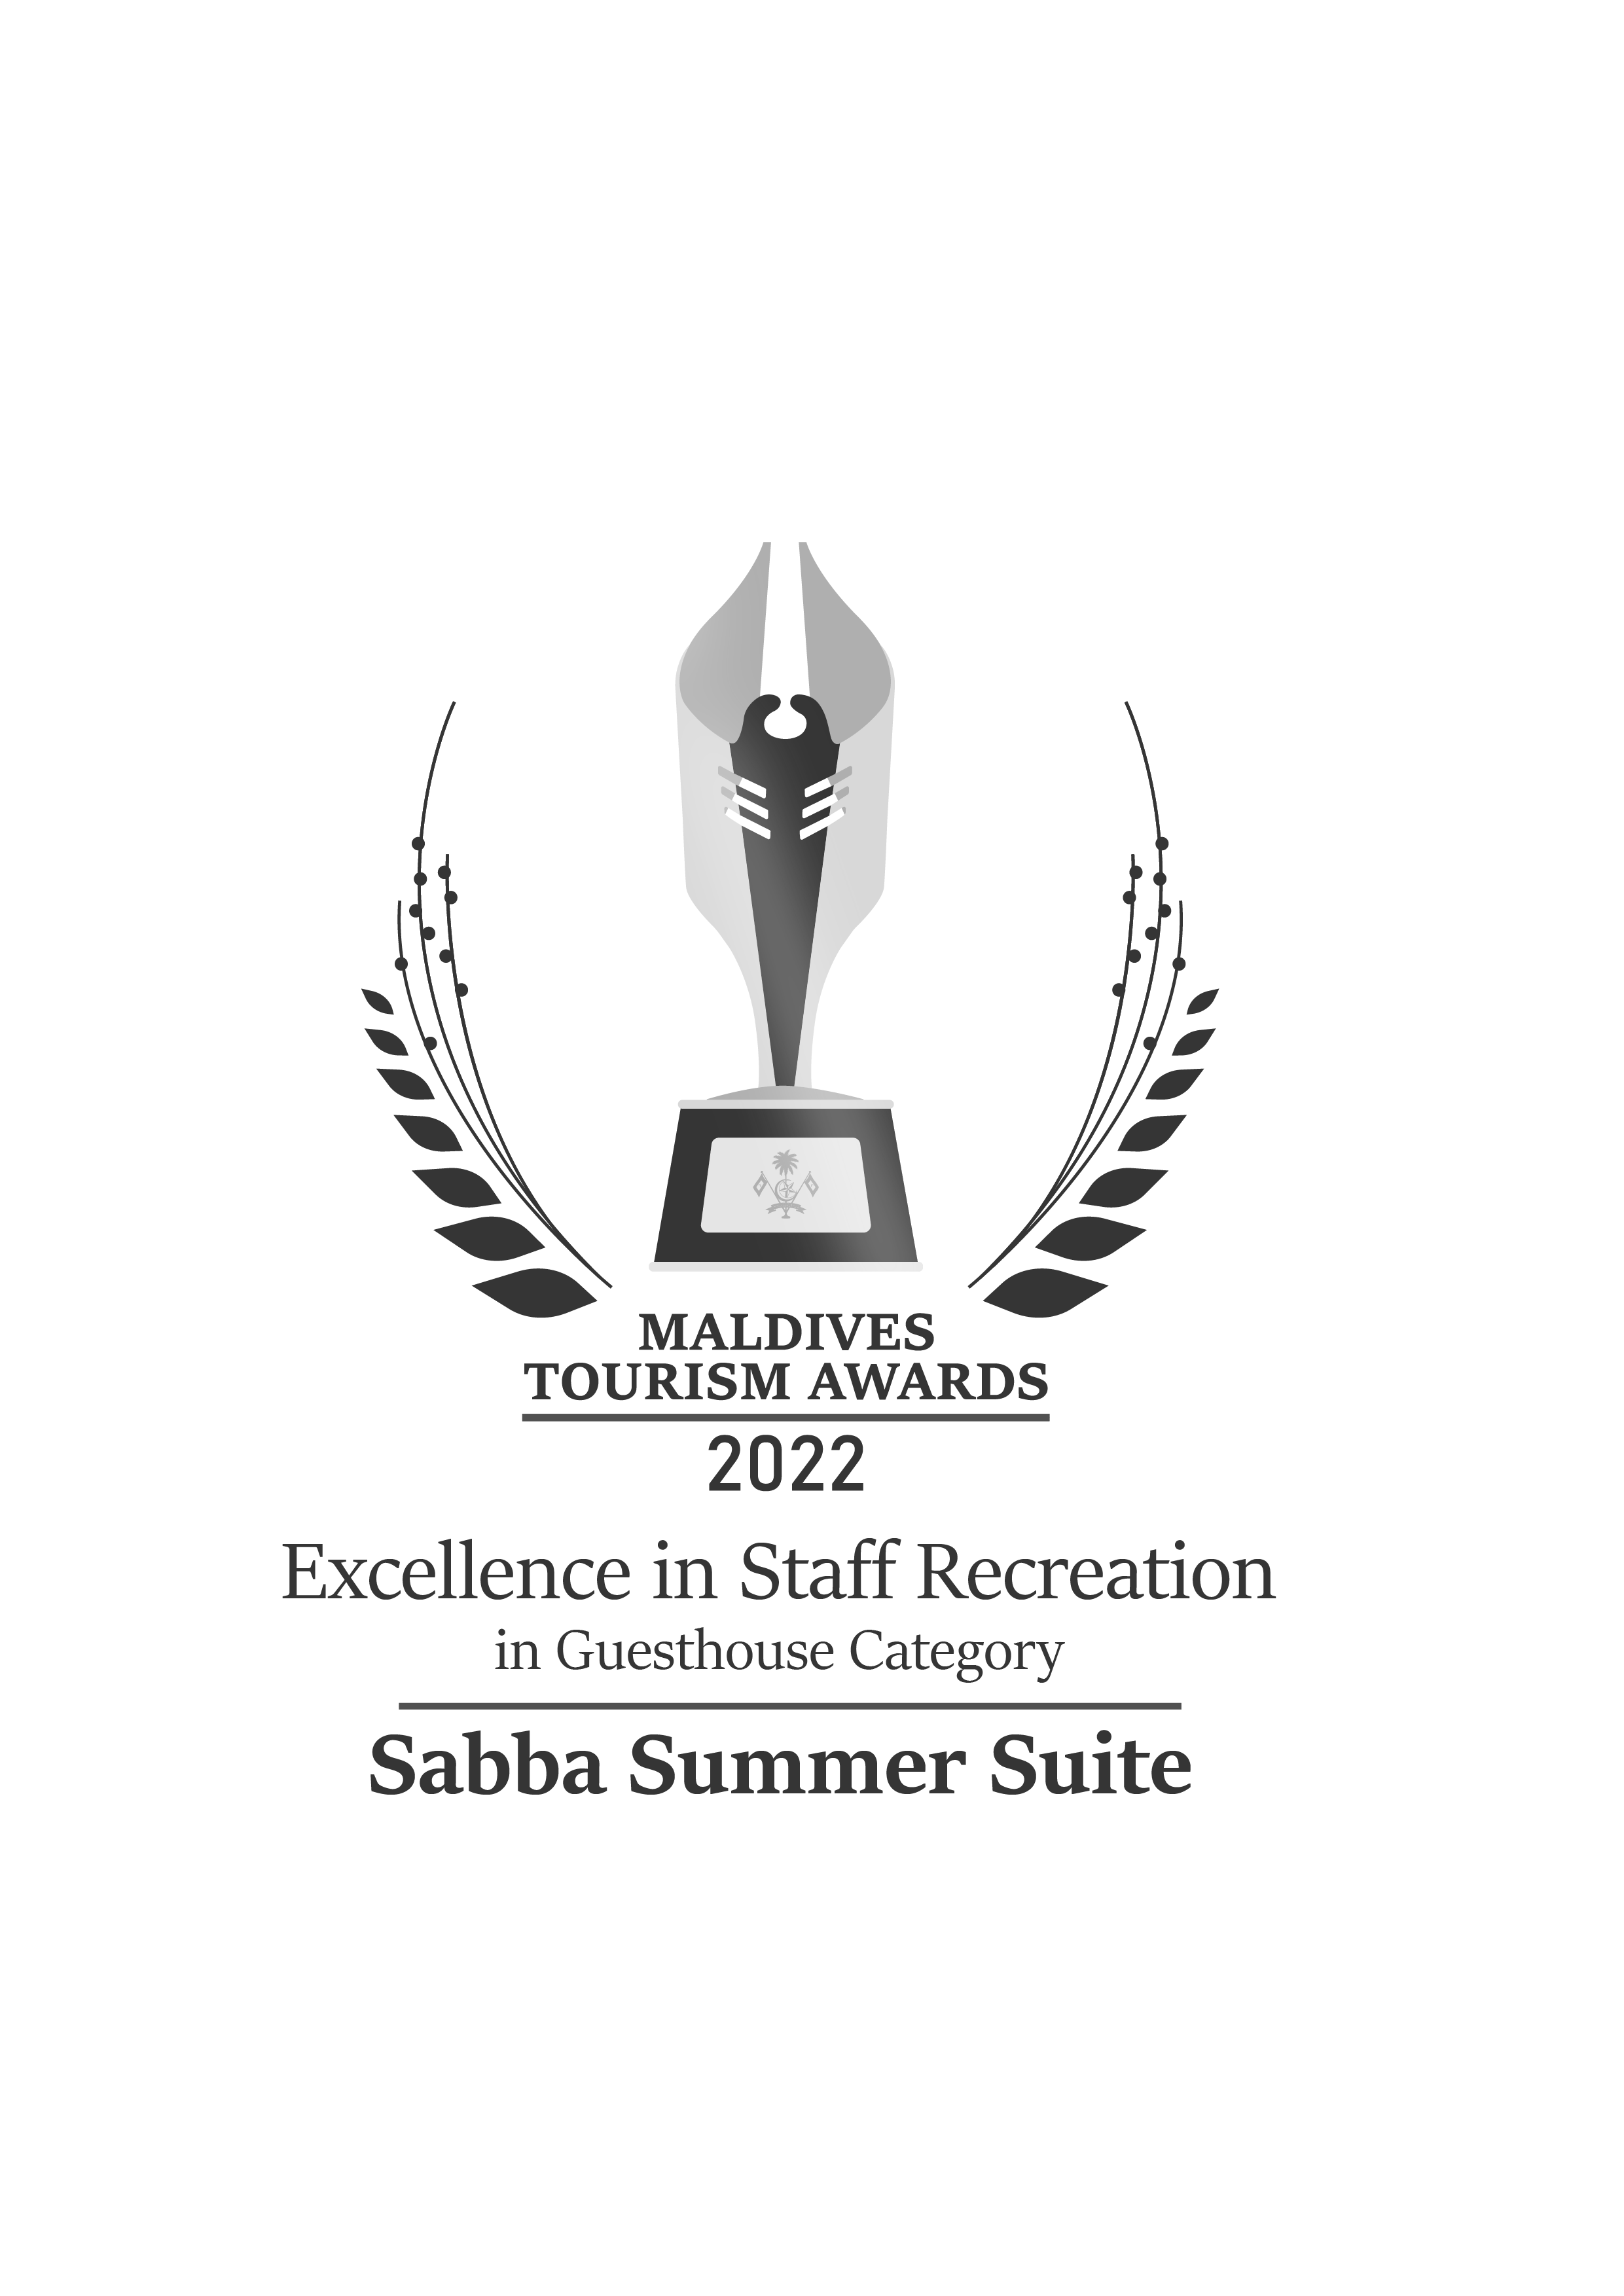 Sabba Summer Suite - excellence in staff recreation